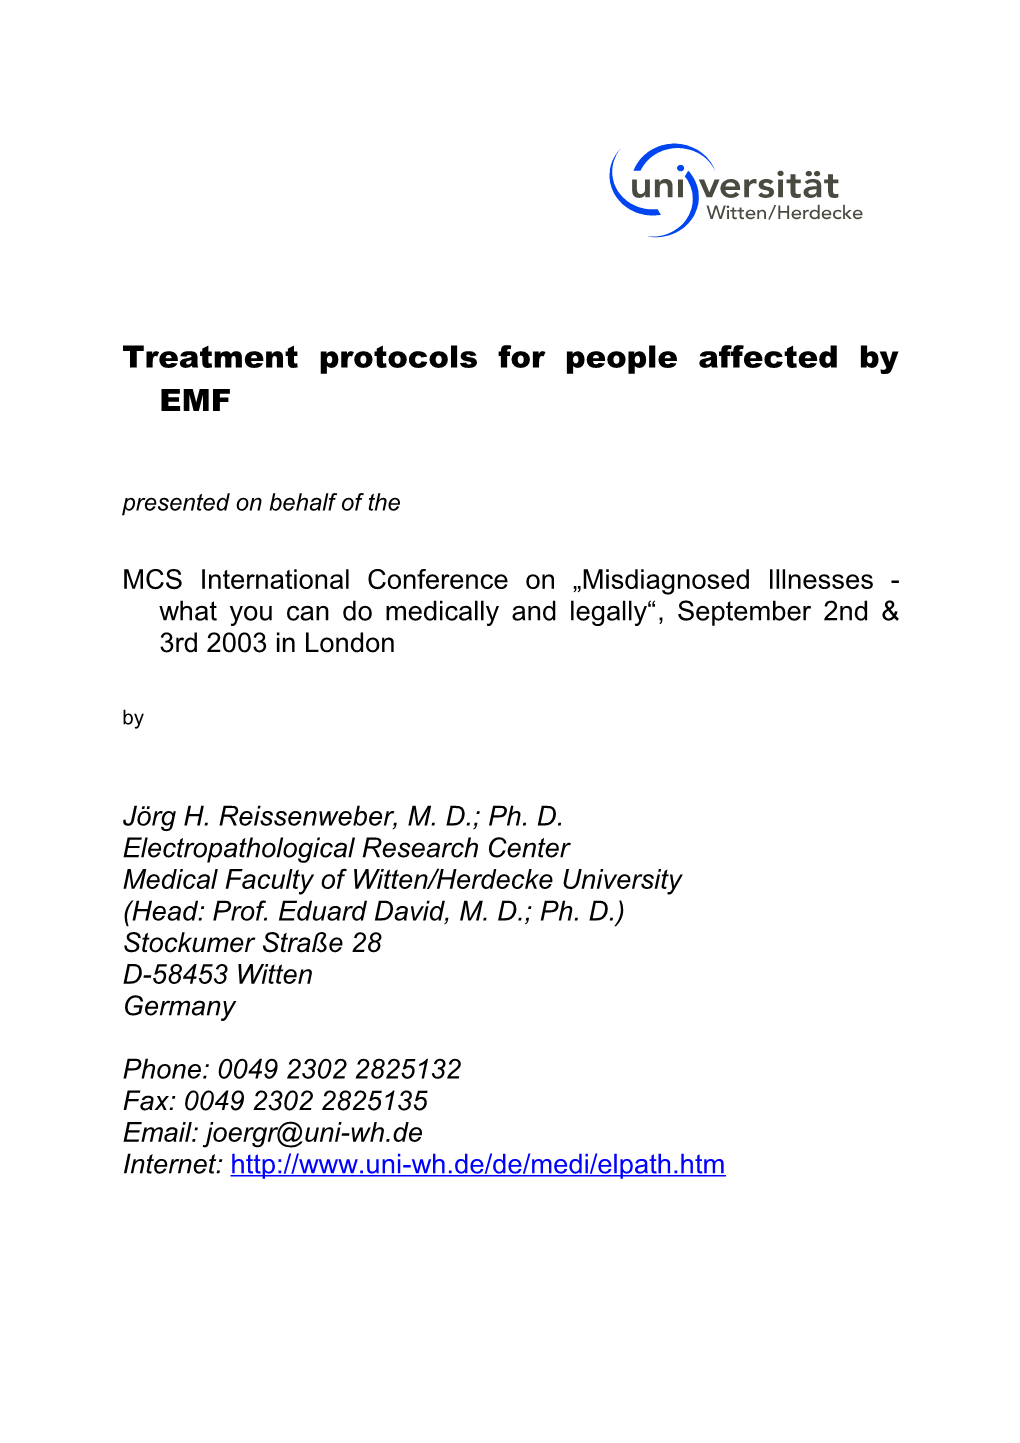 Treatment Protocols for People Affected by EMF